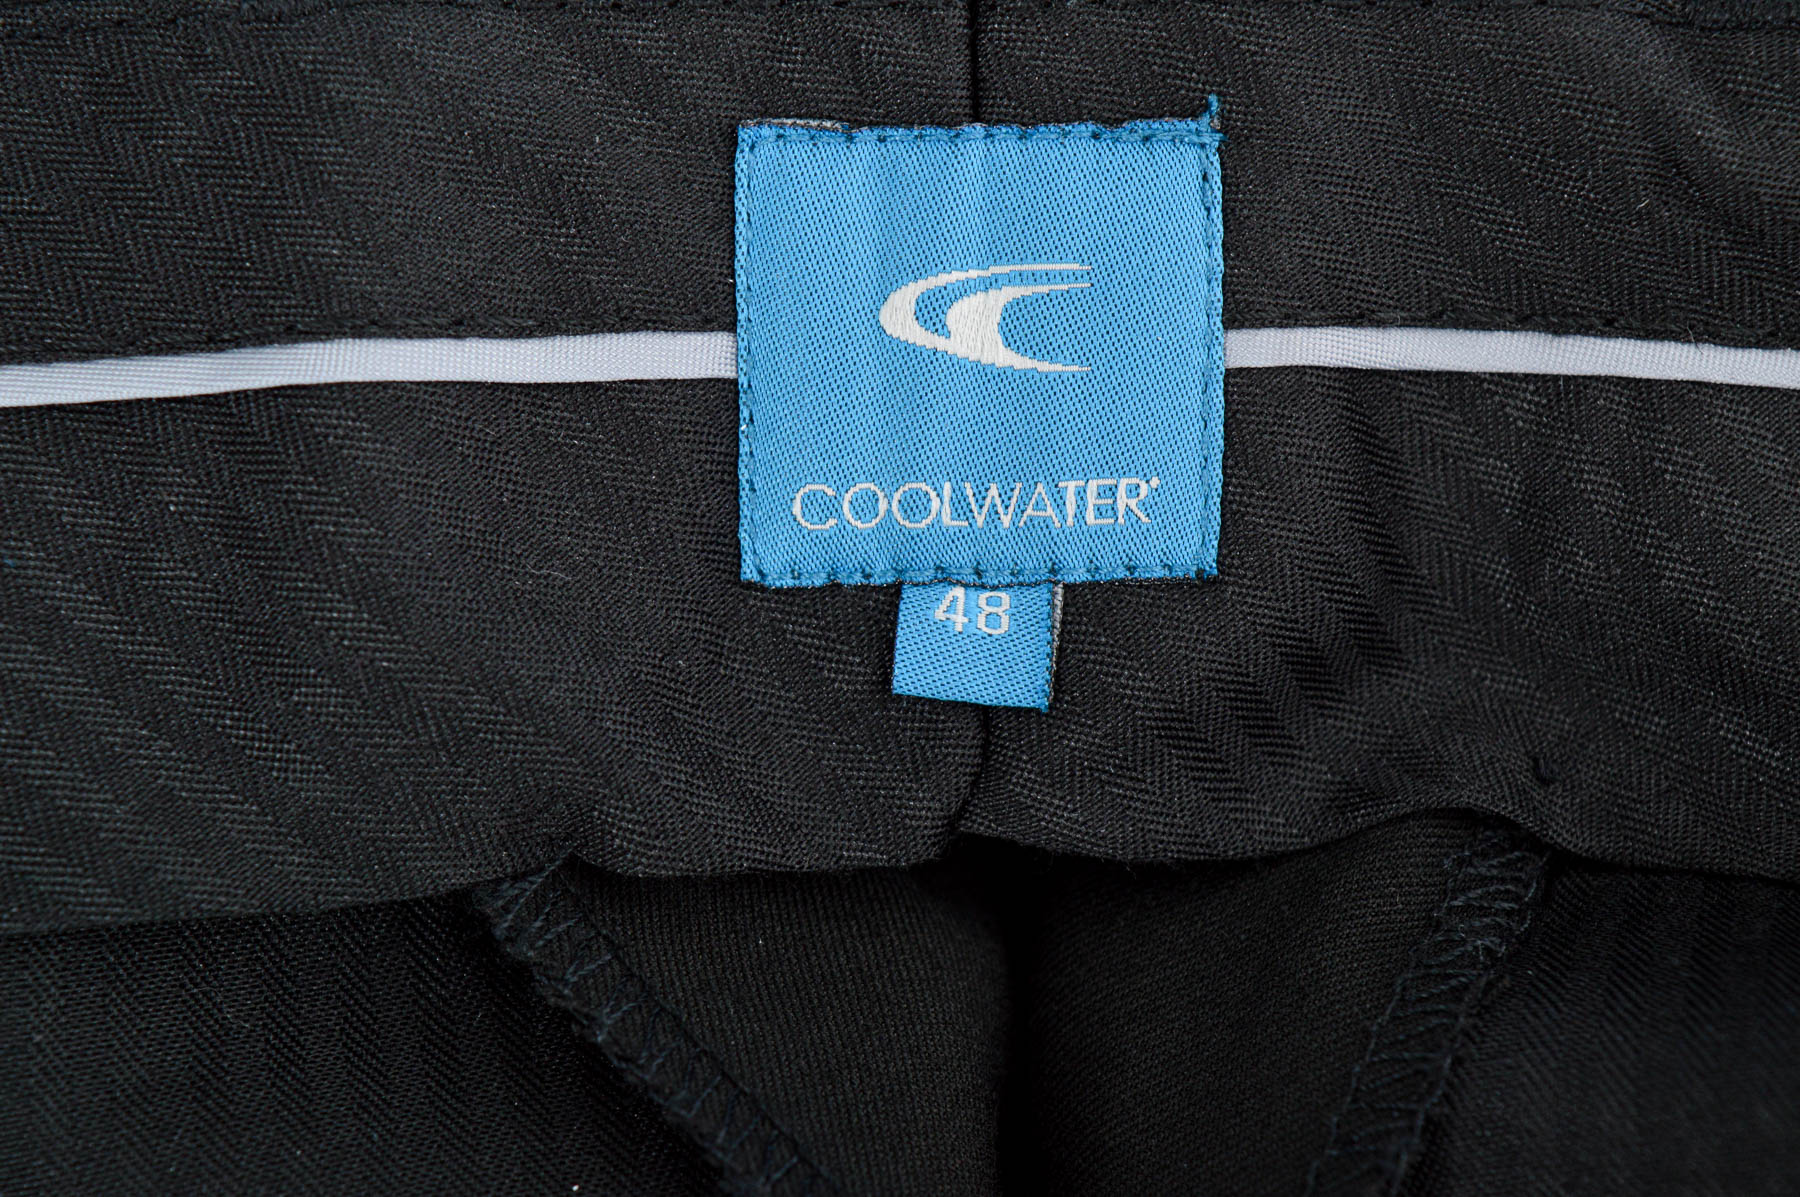 Men's trousers - Coolwater - 2